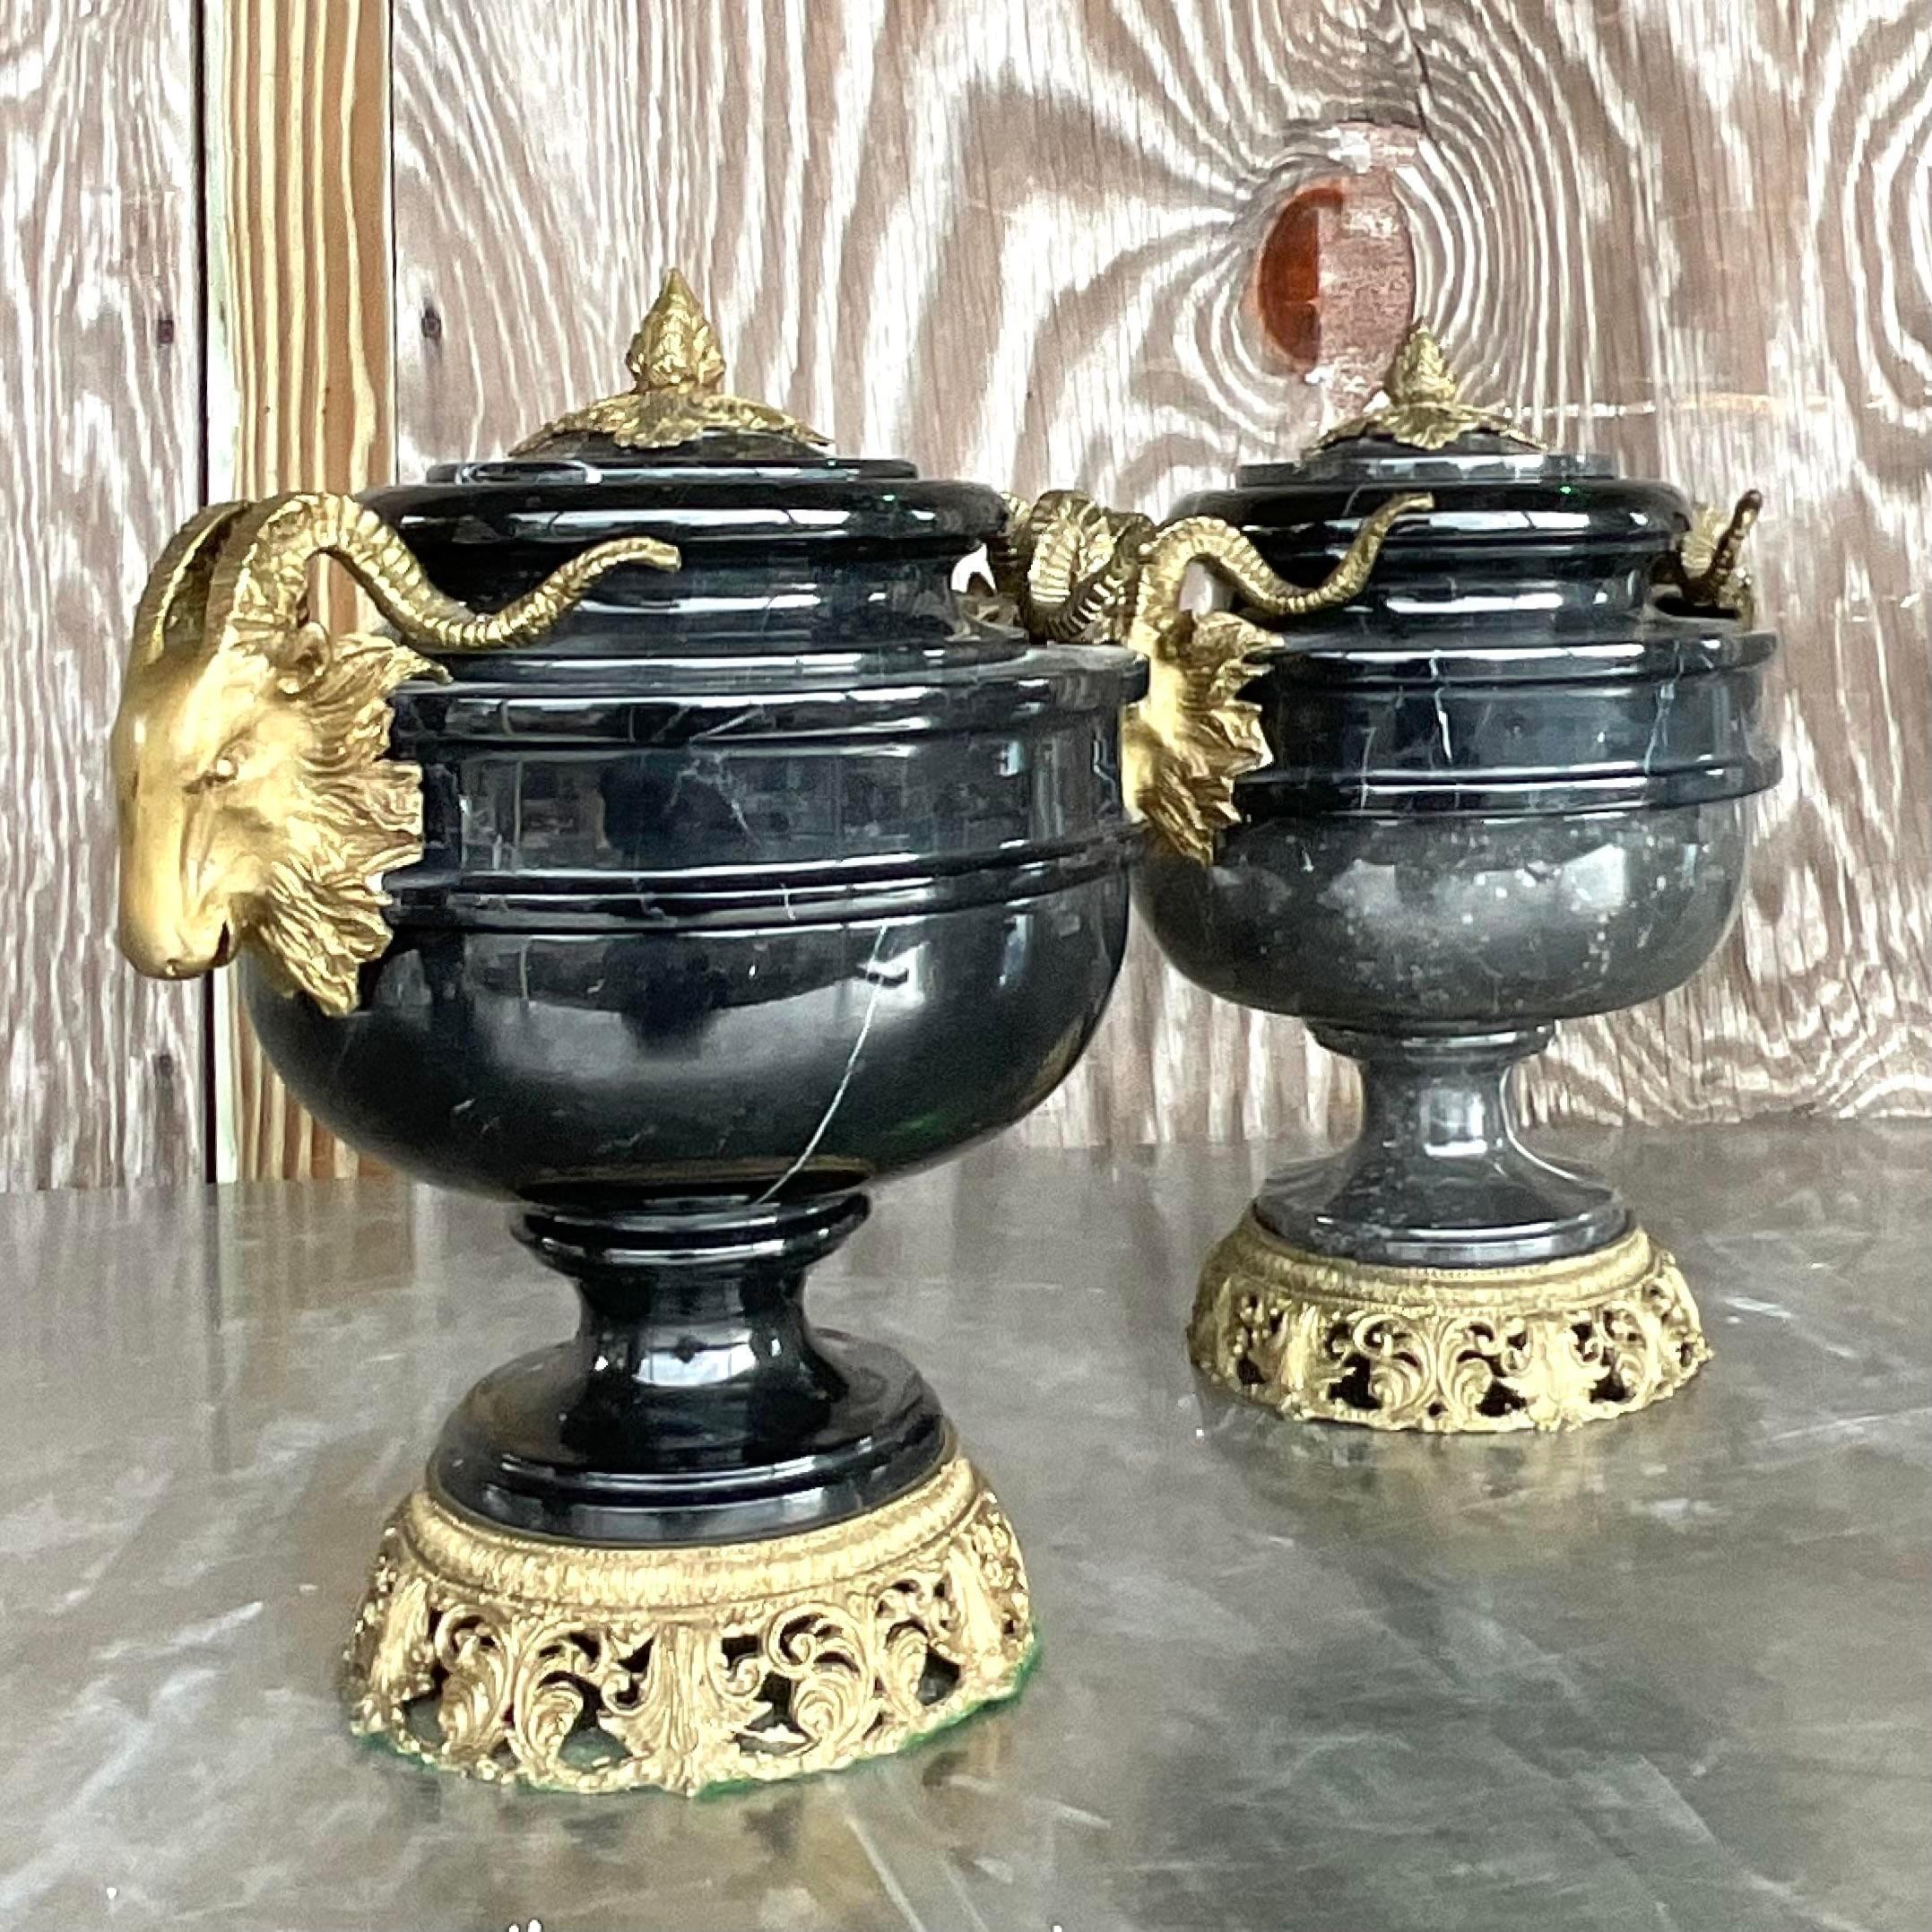 20th Century Vintage Boho Black Marble and Brass Ram’s Head Lidded Urns - a Pair For Sale